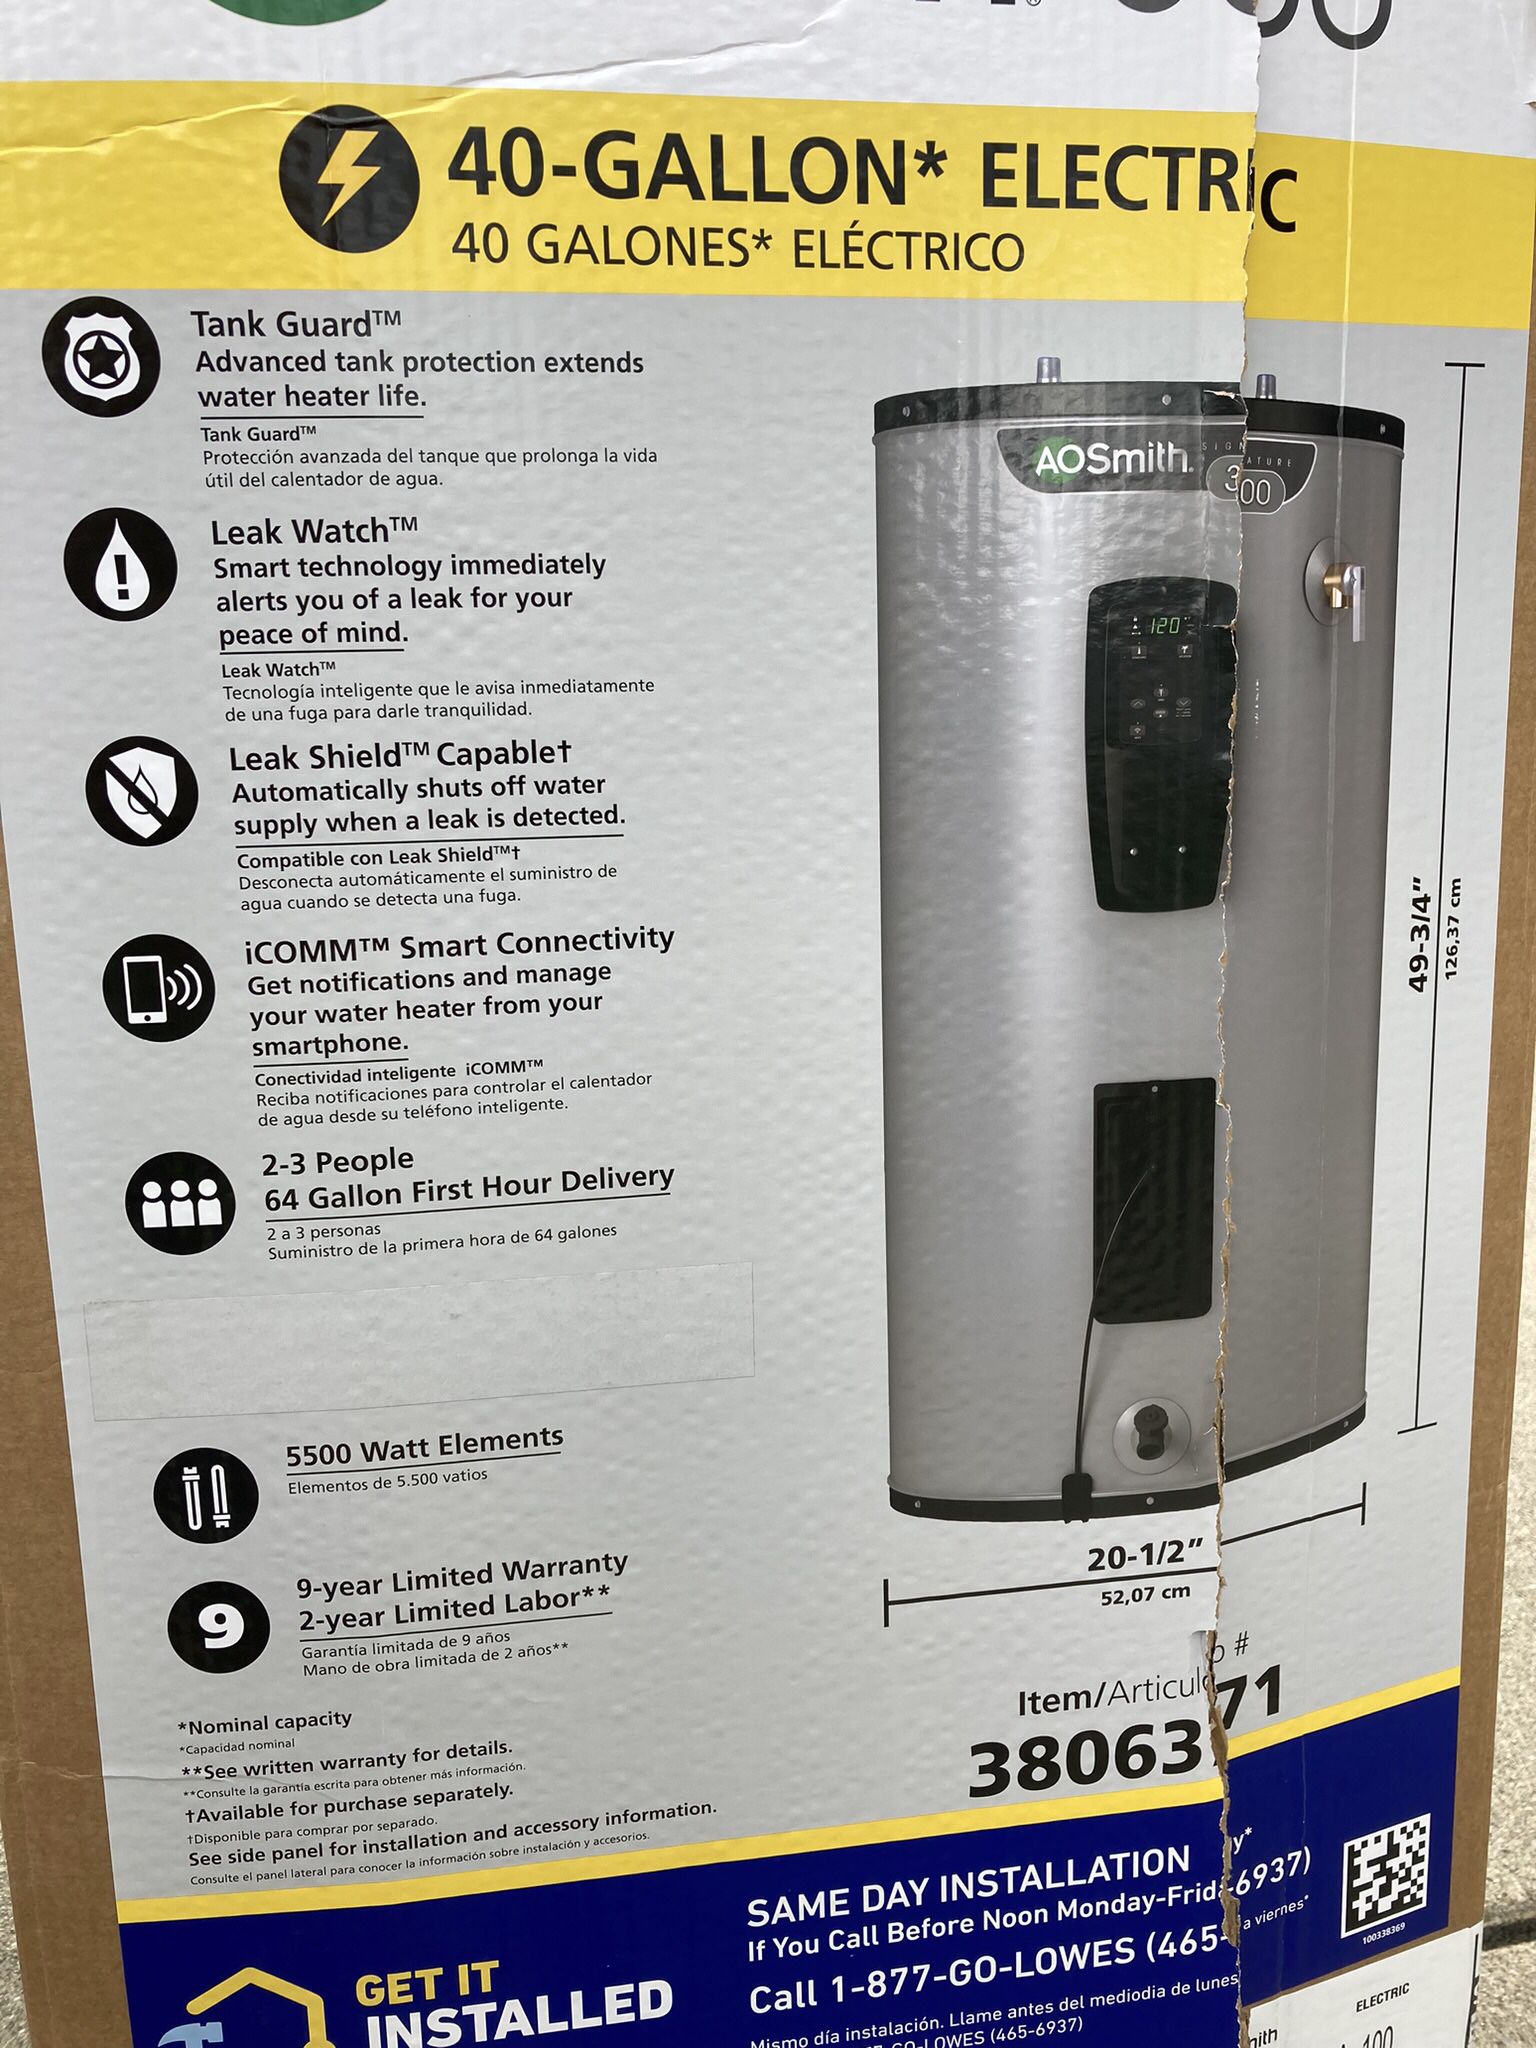 Electric Water heater 